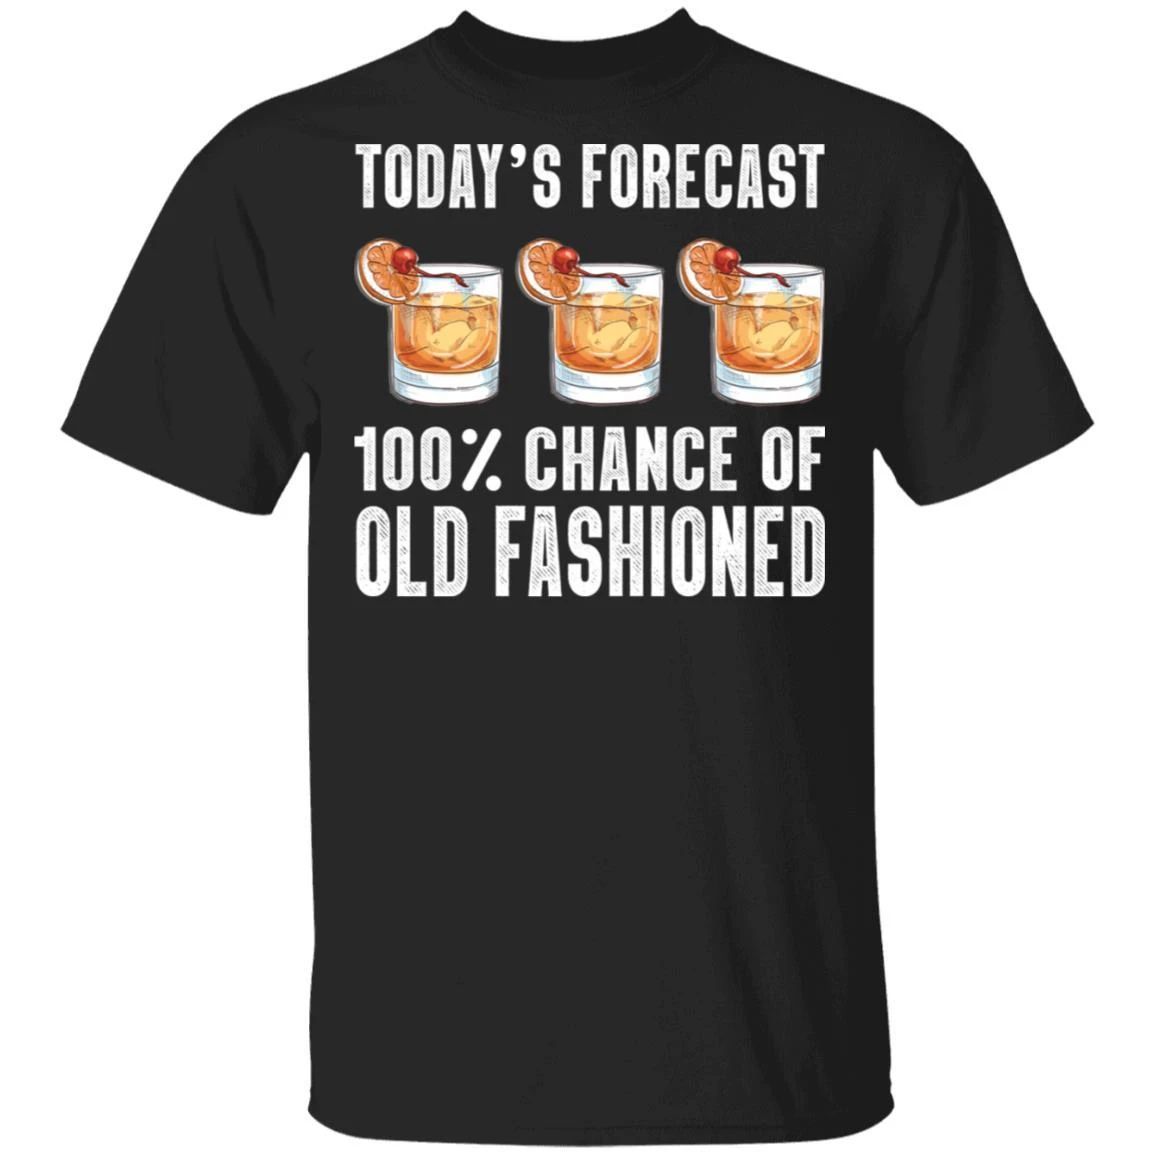 Today’s Forecast 100% Old Fashioned T-shirt Cocktail Tee